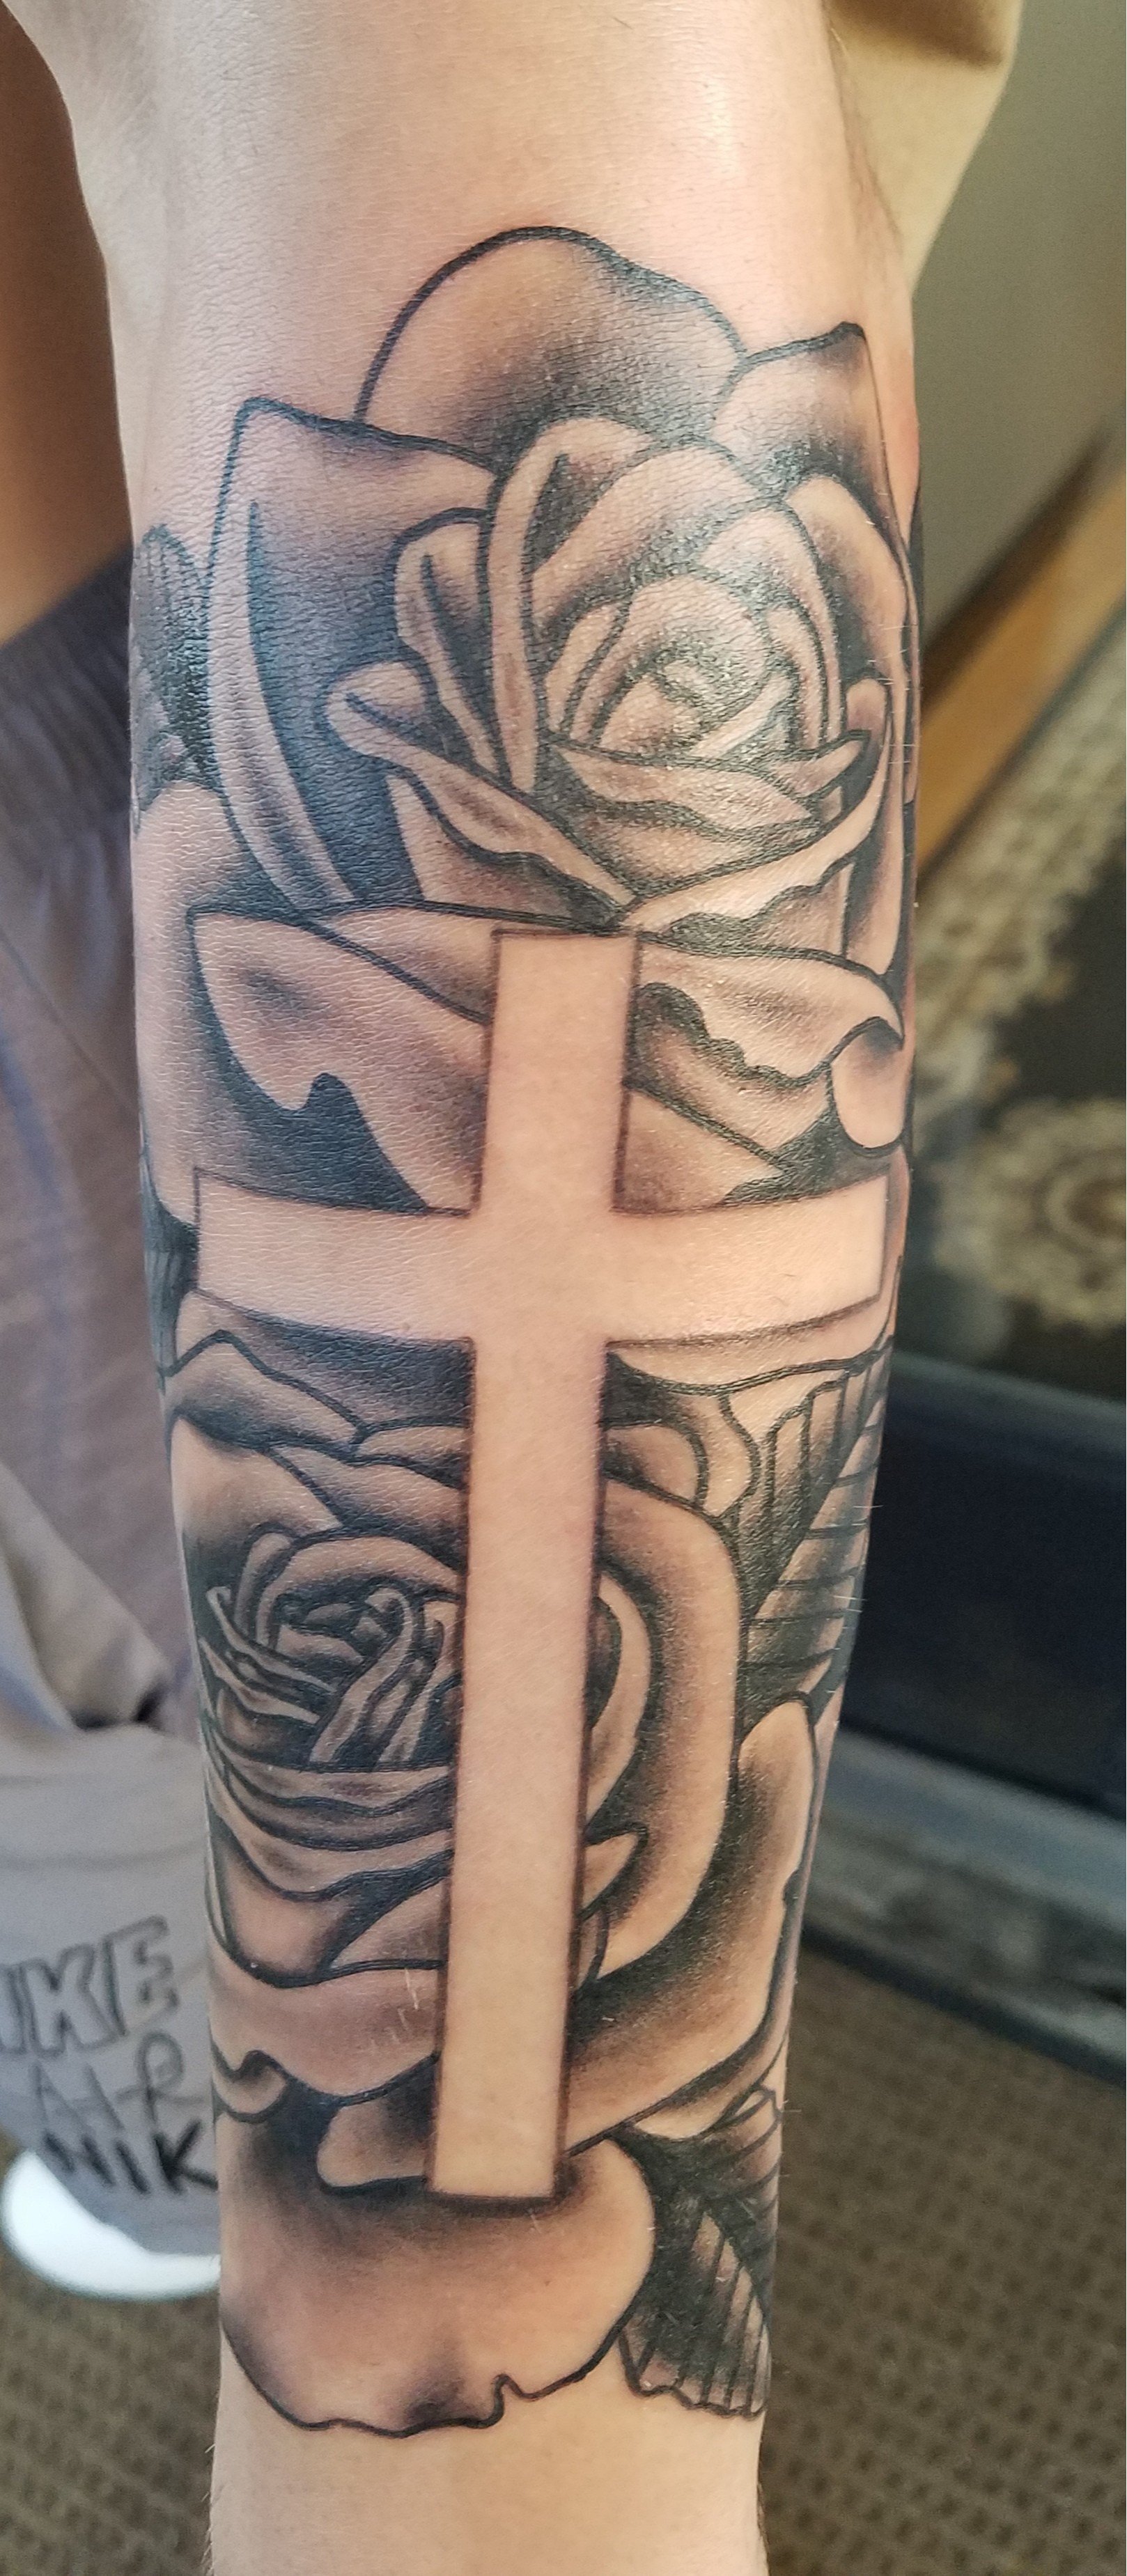 Crusader Shield Tattoo with Cross and Celtic Knotwork  LuckyFish Art